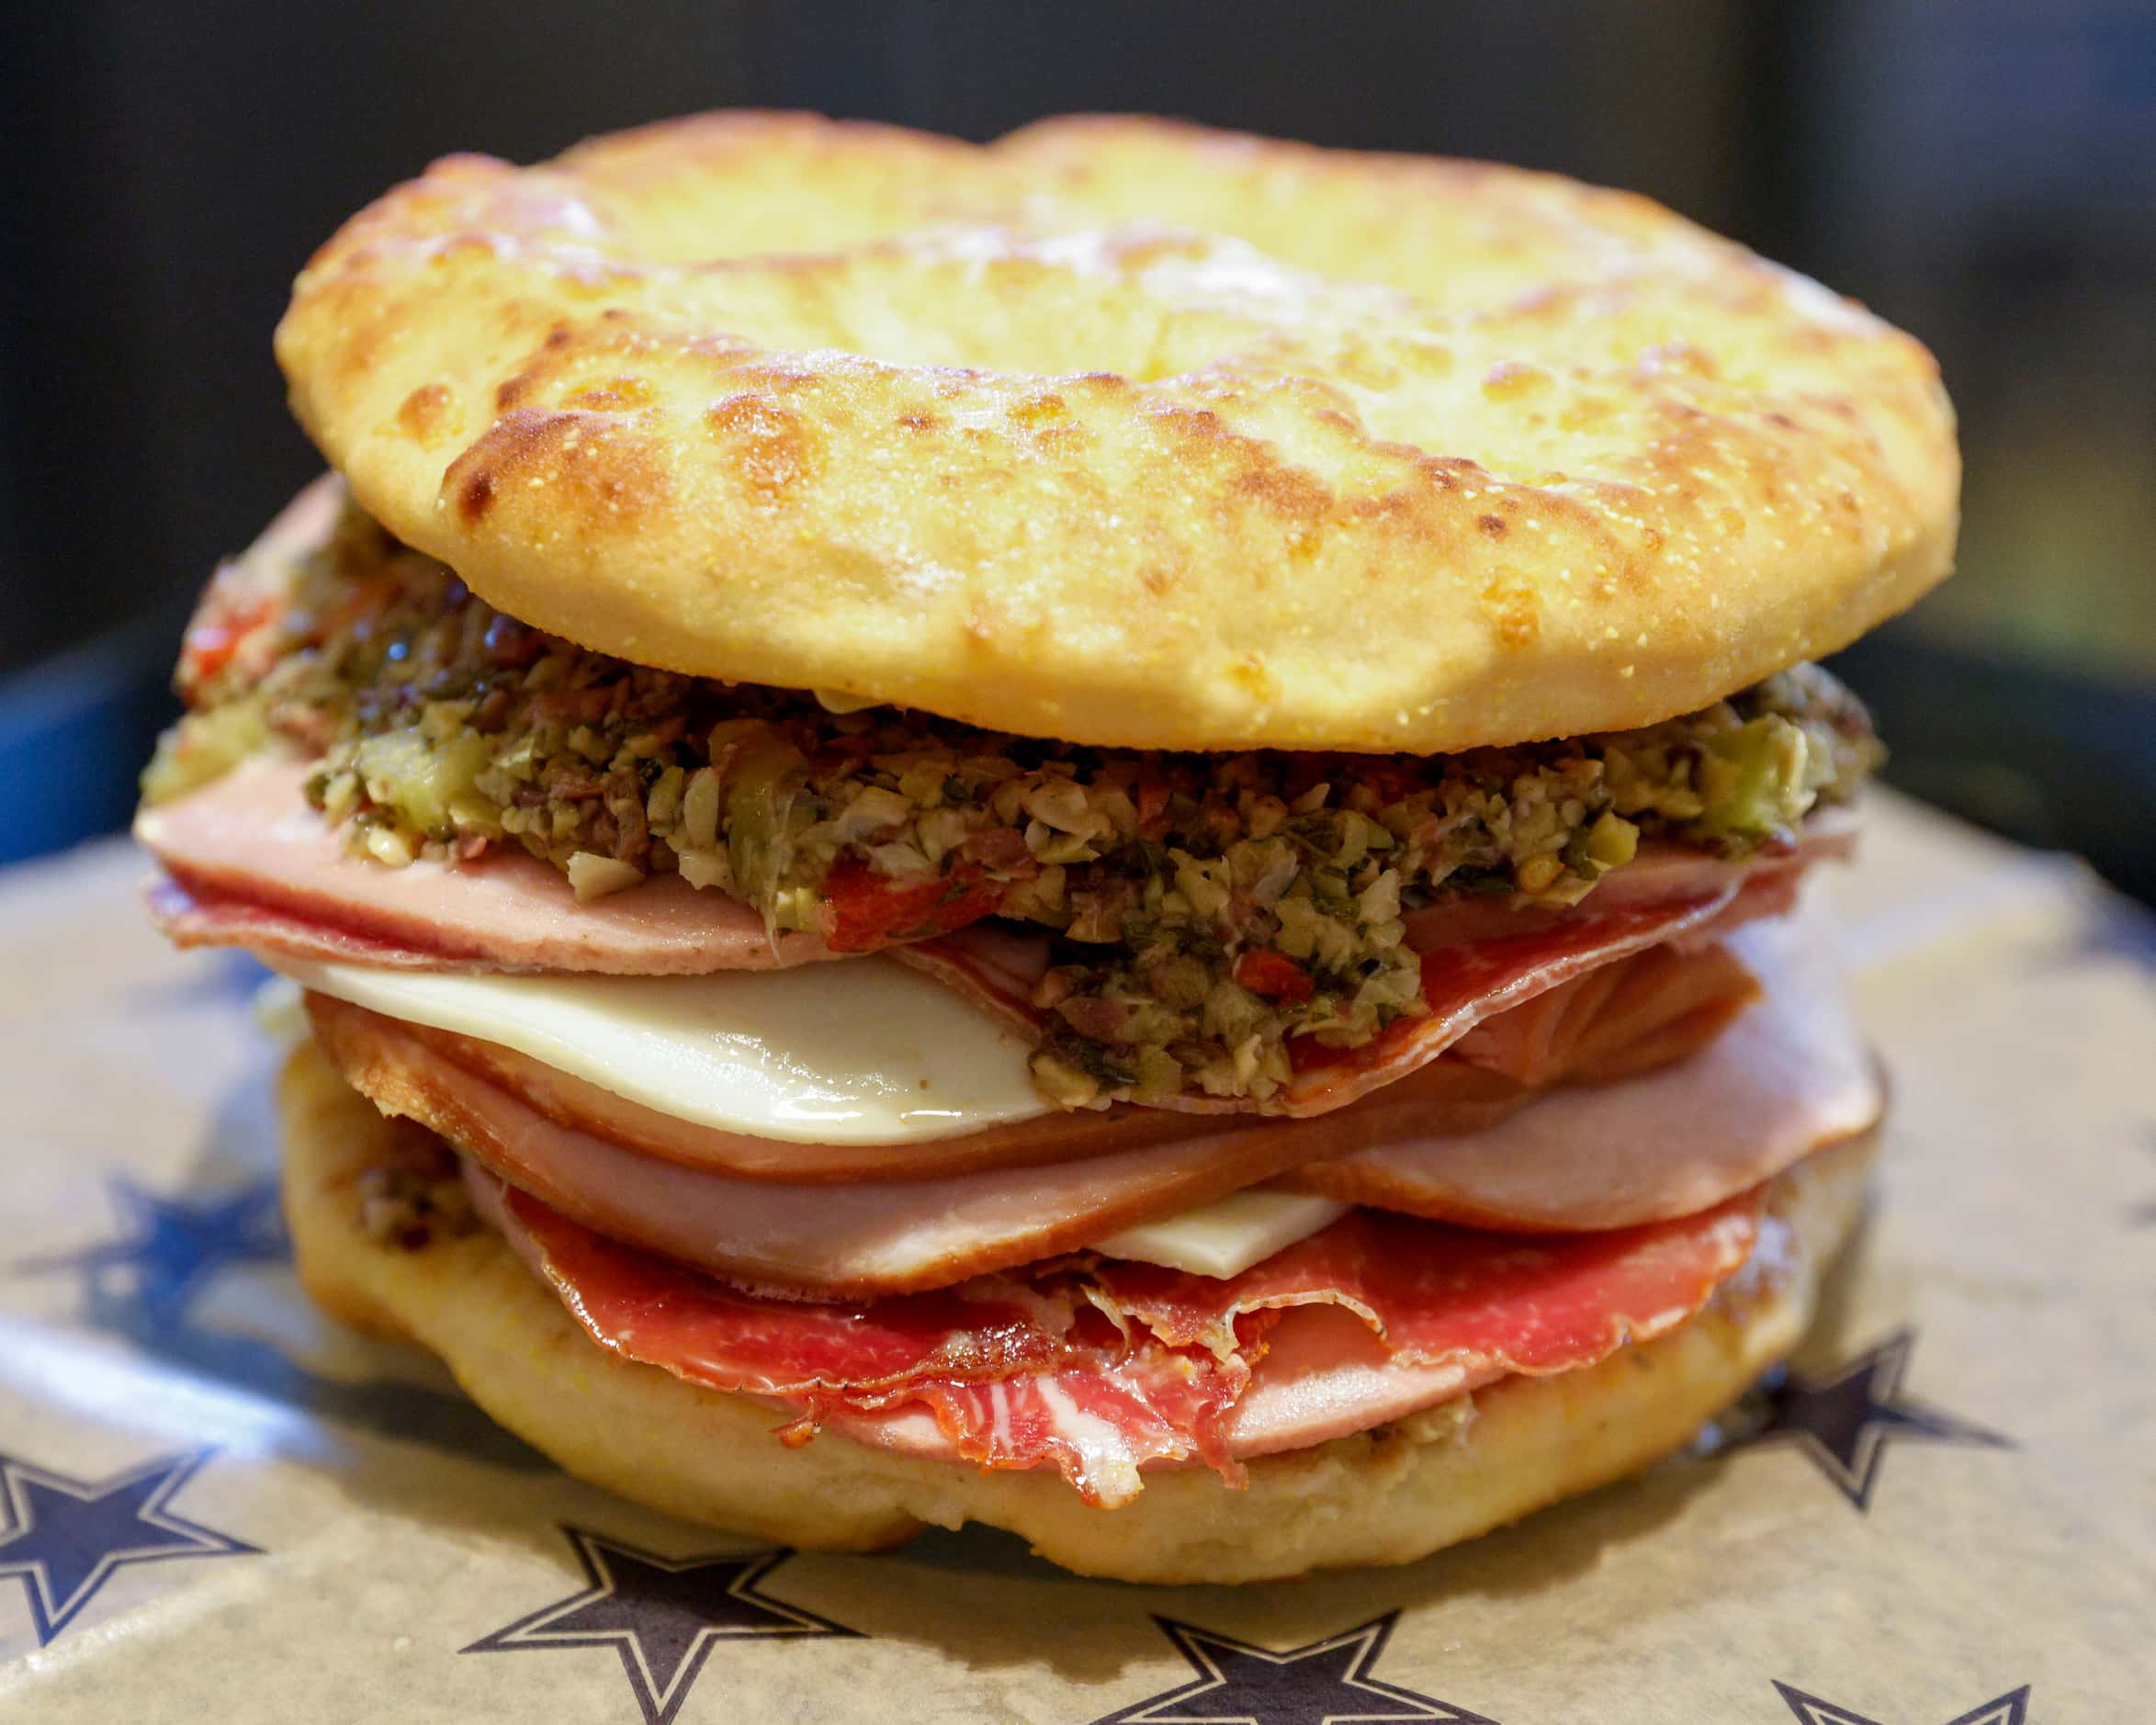 Want a sandwich almost as big as your face? The muffuletta might be the answer. It's on the...